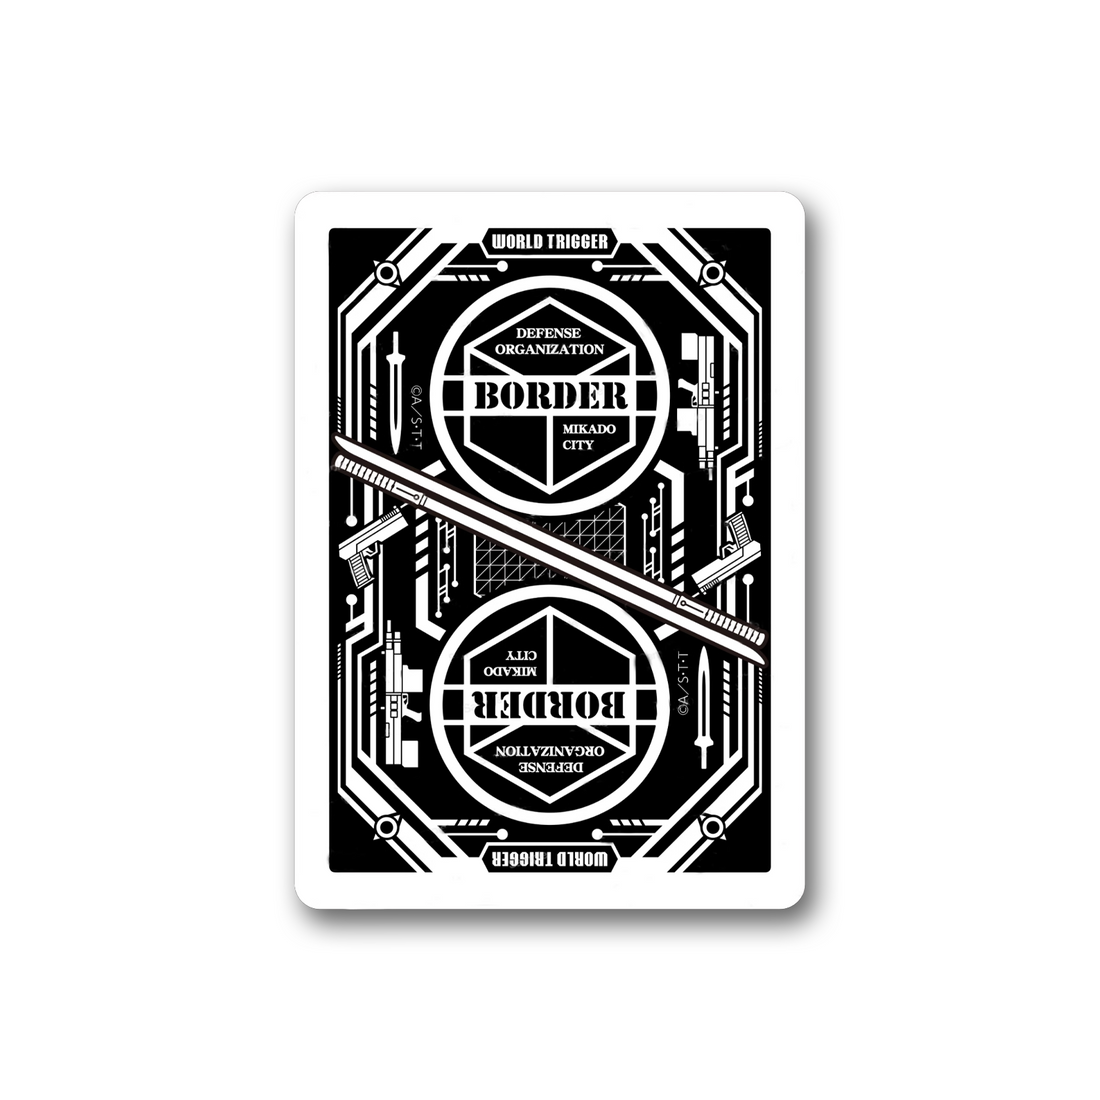 Bicycle World Trigger v2 Playing Cards